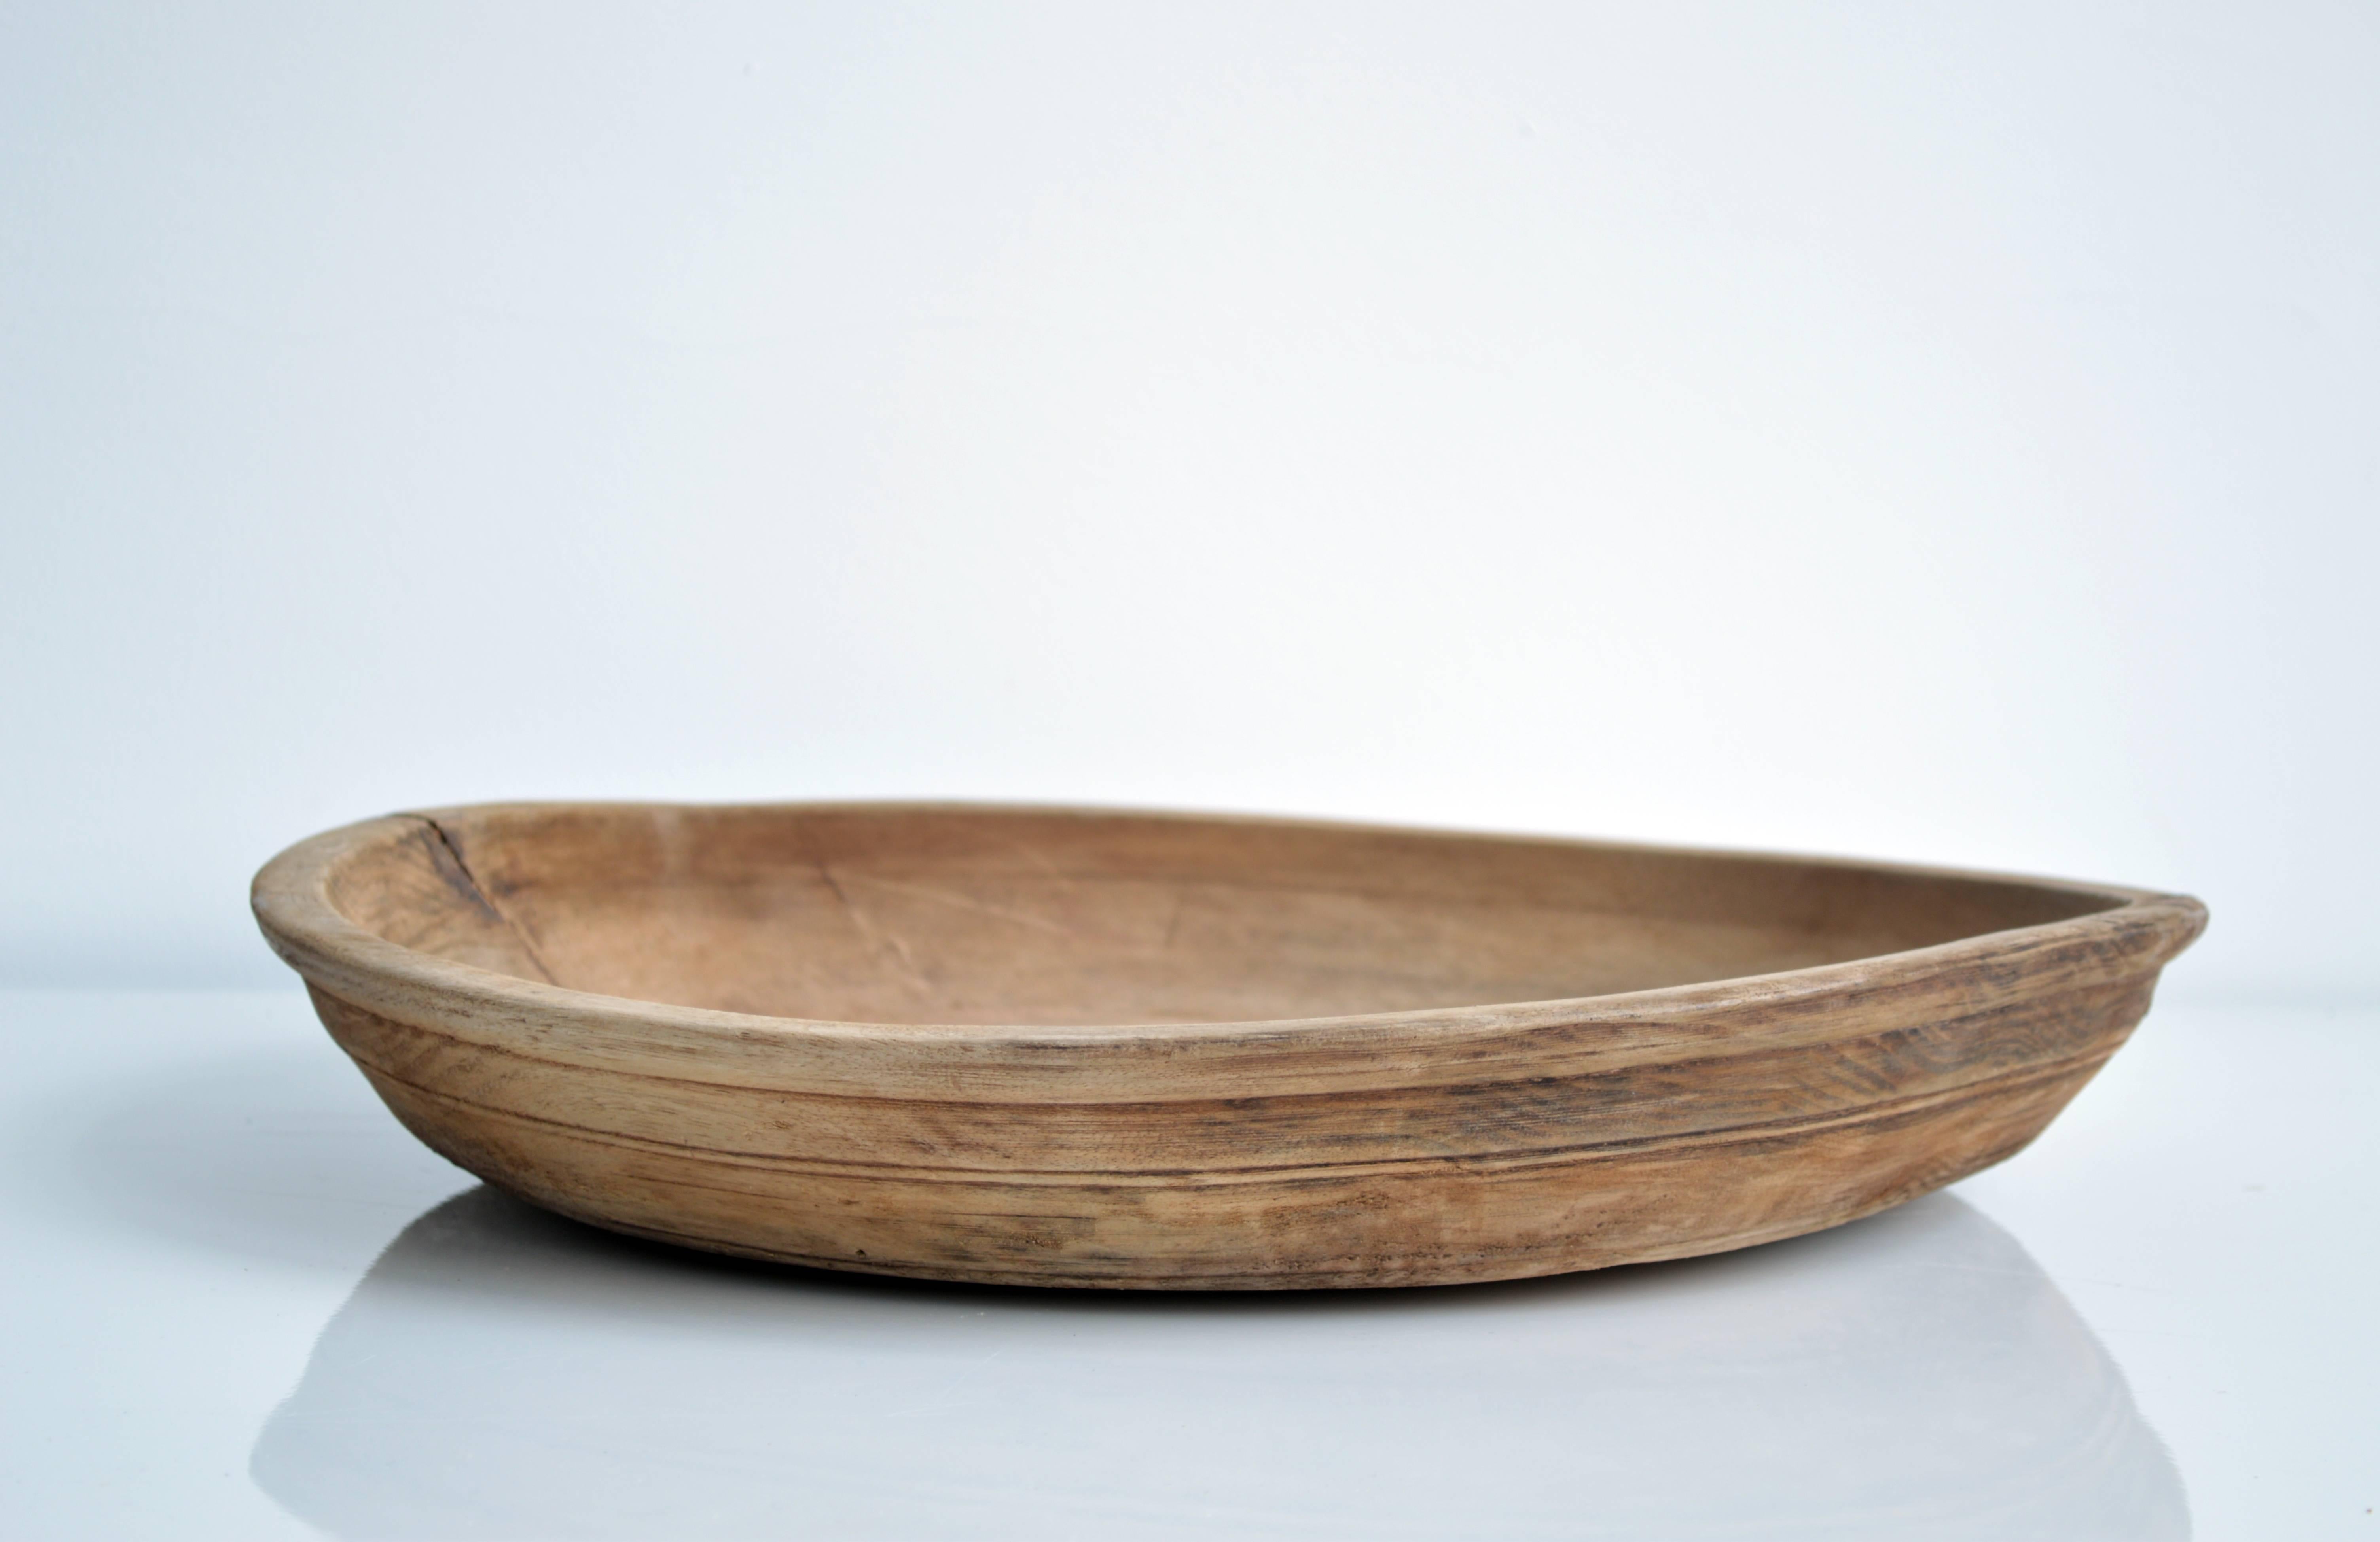 Rustic carved wood bowl, originally from Iran. This piece would make for a beautiful decorative display vessel in any home.